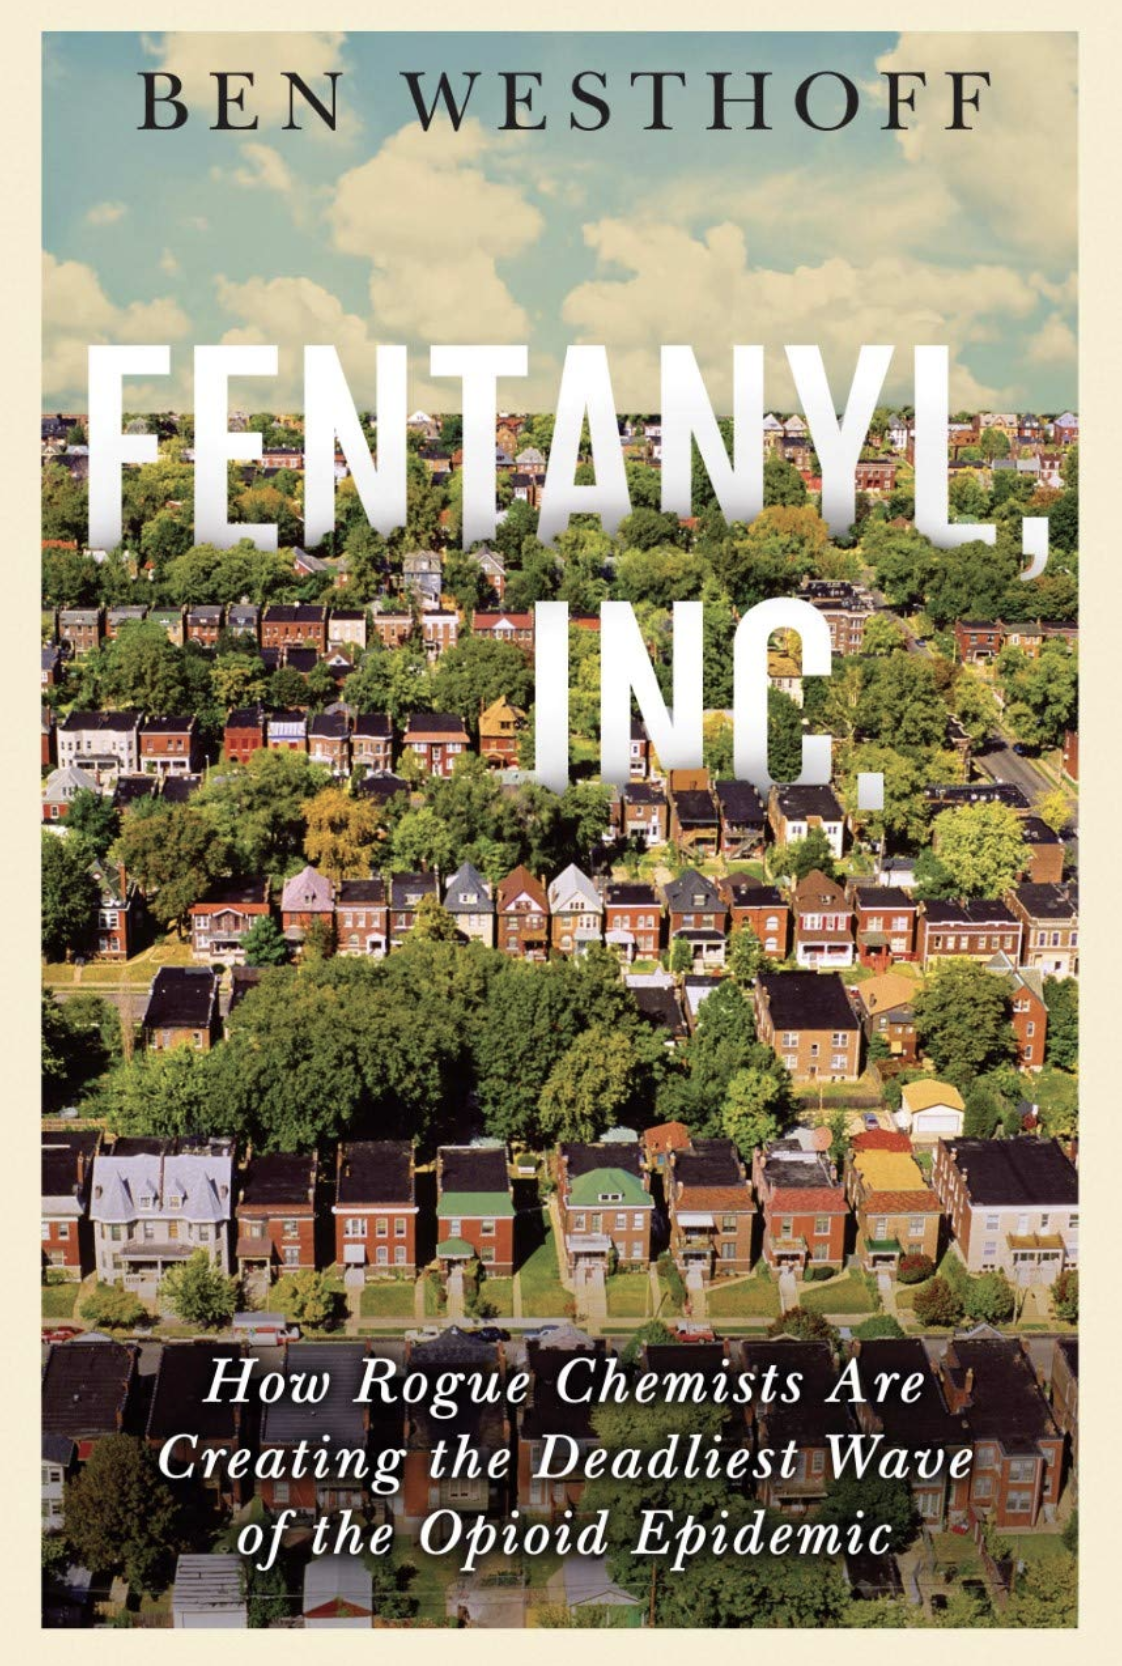 NPR Looks At The History Of Fentanyl